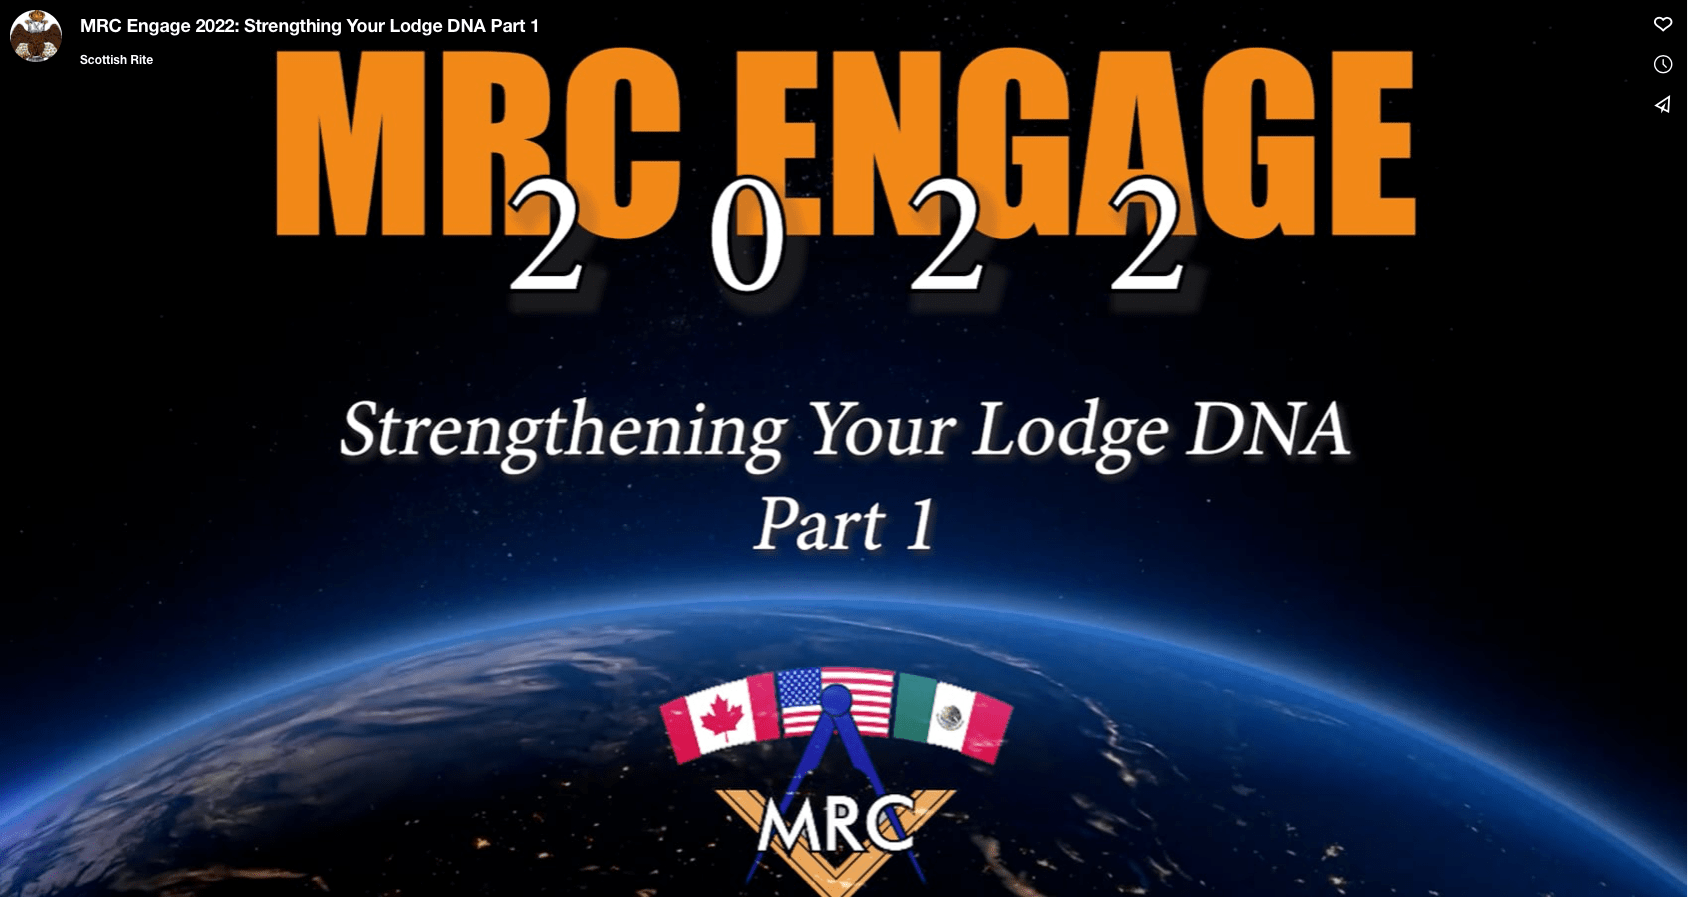 Strengthening Your Lodge DNA video link